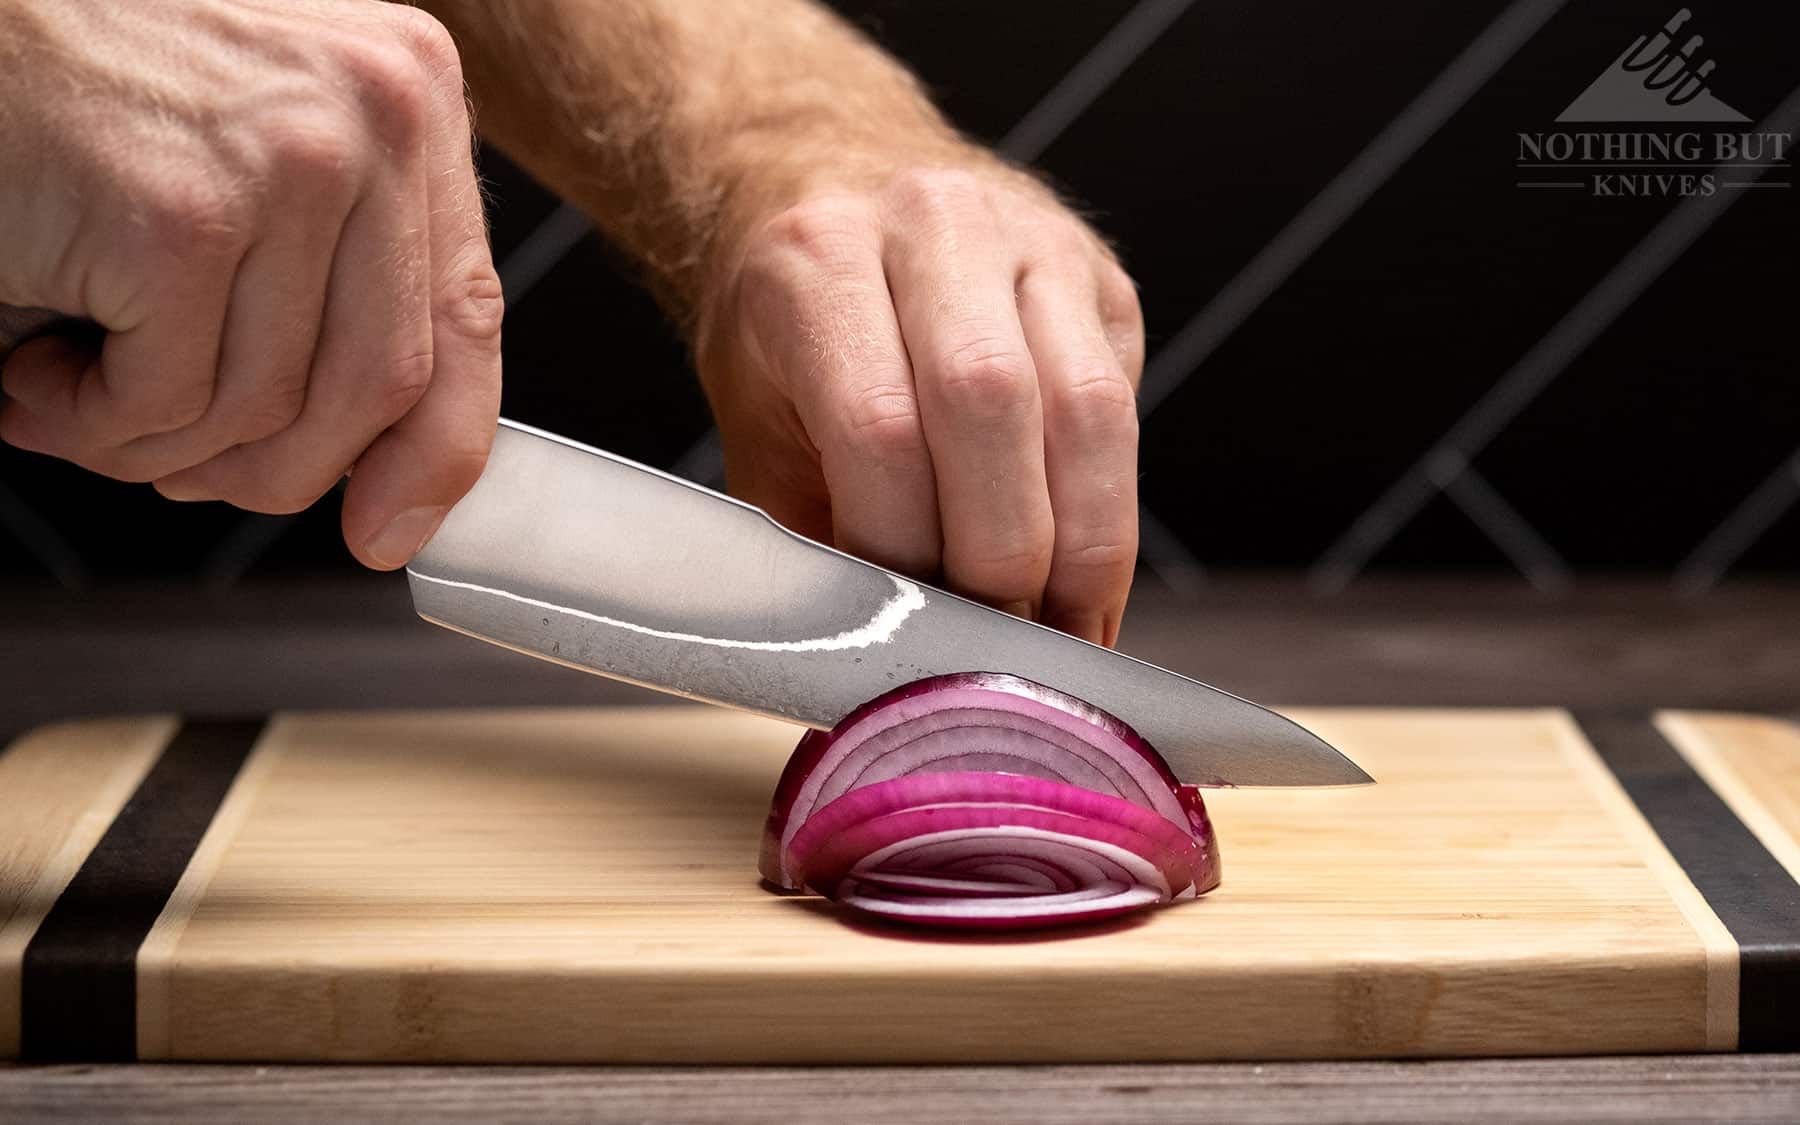 The XinCraft 8.4 inch chef knife shows its slicing prowess in this image of it being used to cut up an onion.  